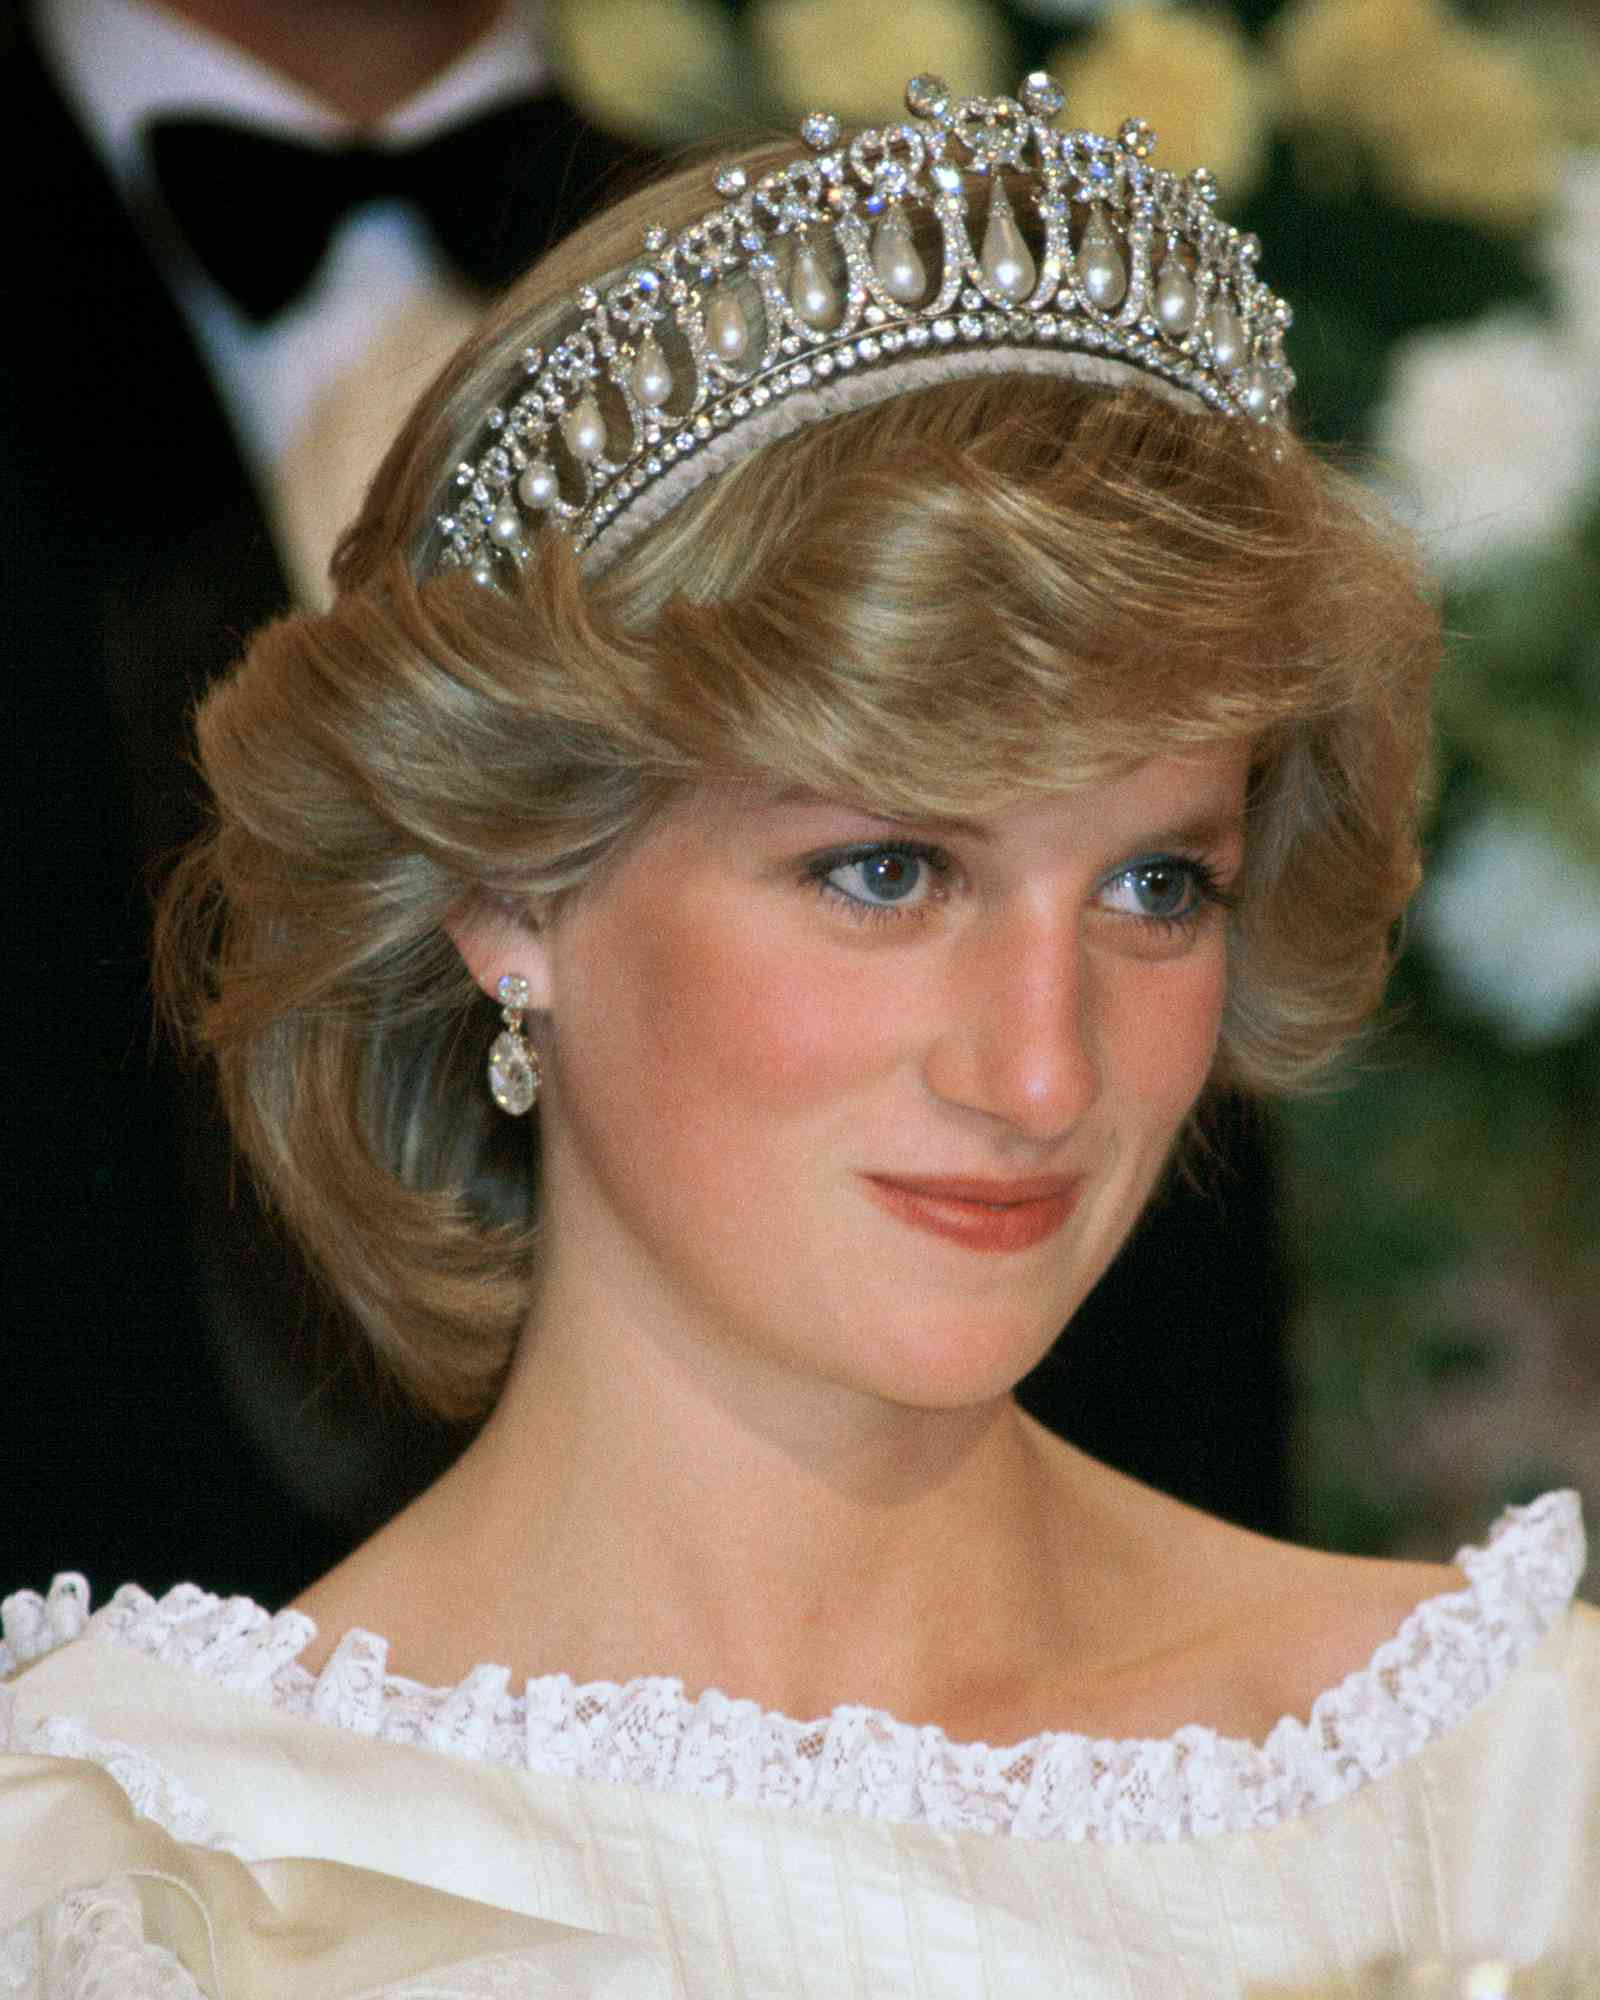 Princess Diana At A Banquet In New Zealand Wearing The Cambridge Knot Tiara ( Queen Mary's Tiara ) With Diamond Earrings. Her Cream Silk Organza Evening Dress Is Designed By Fashion Designer Gina Fratini